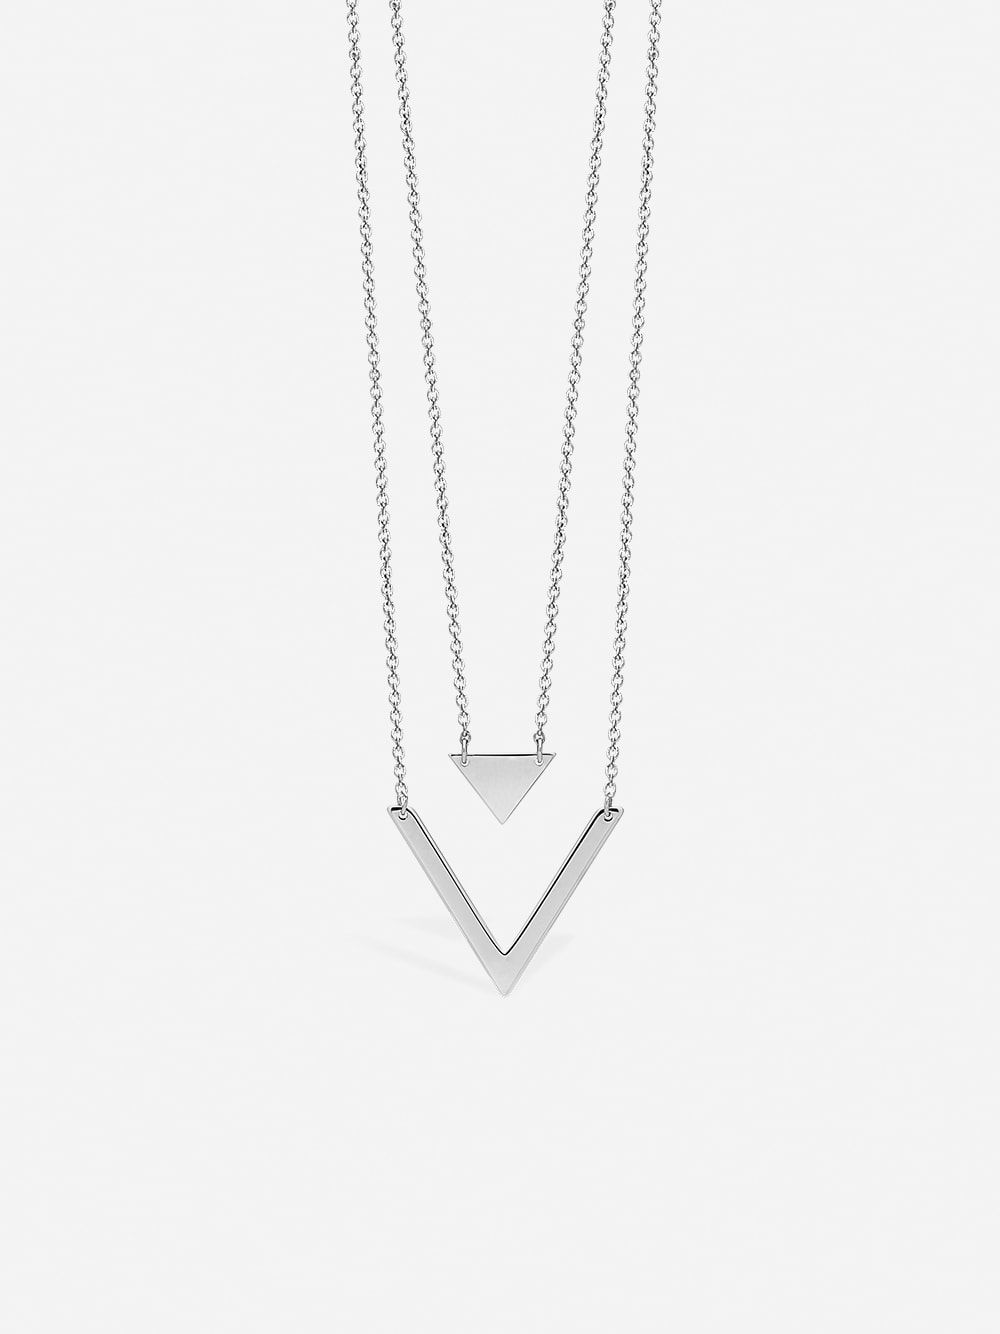 Silver Necklace Geometric Double Triangle | Coquine Jewelry 